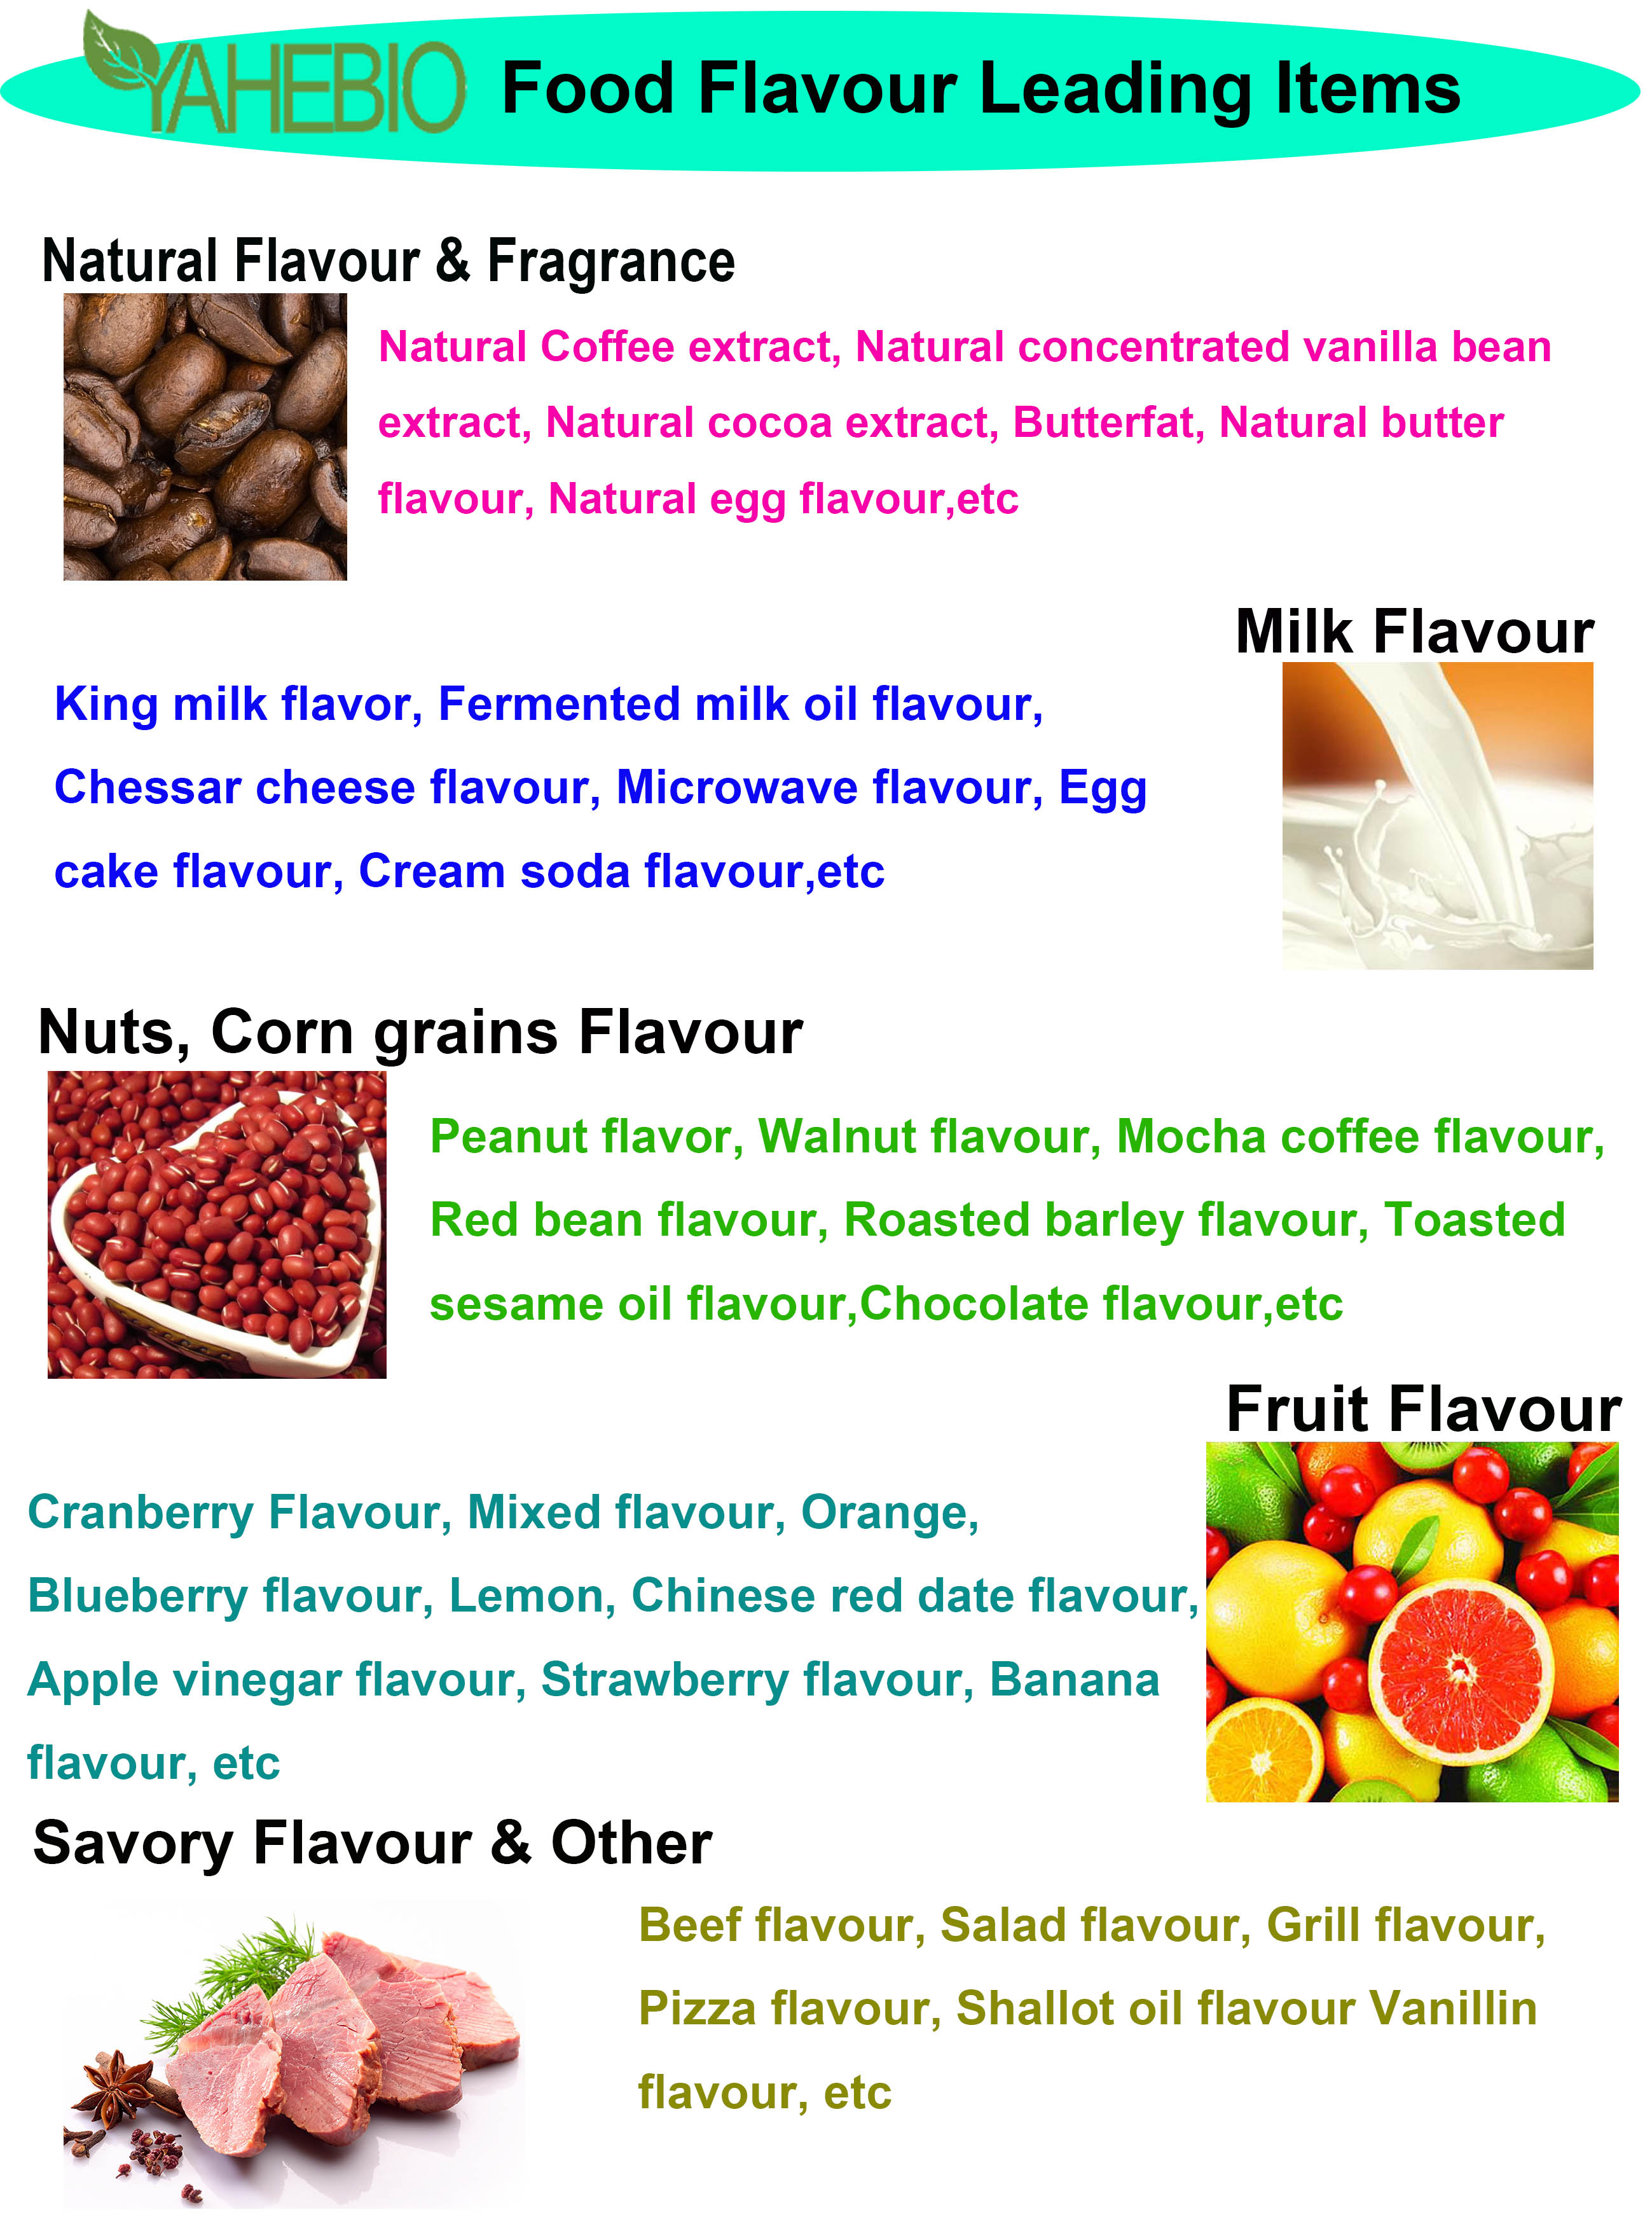 Mixed Fruits Flavour in China